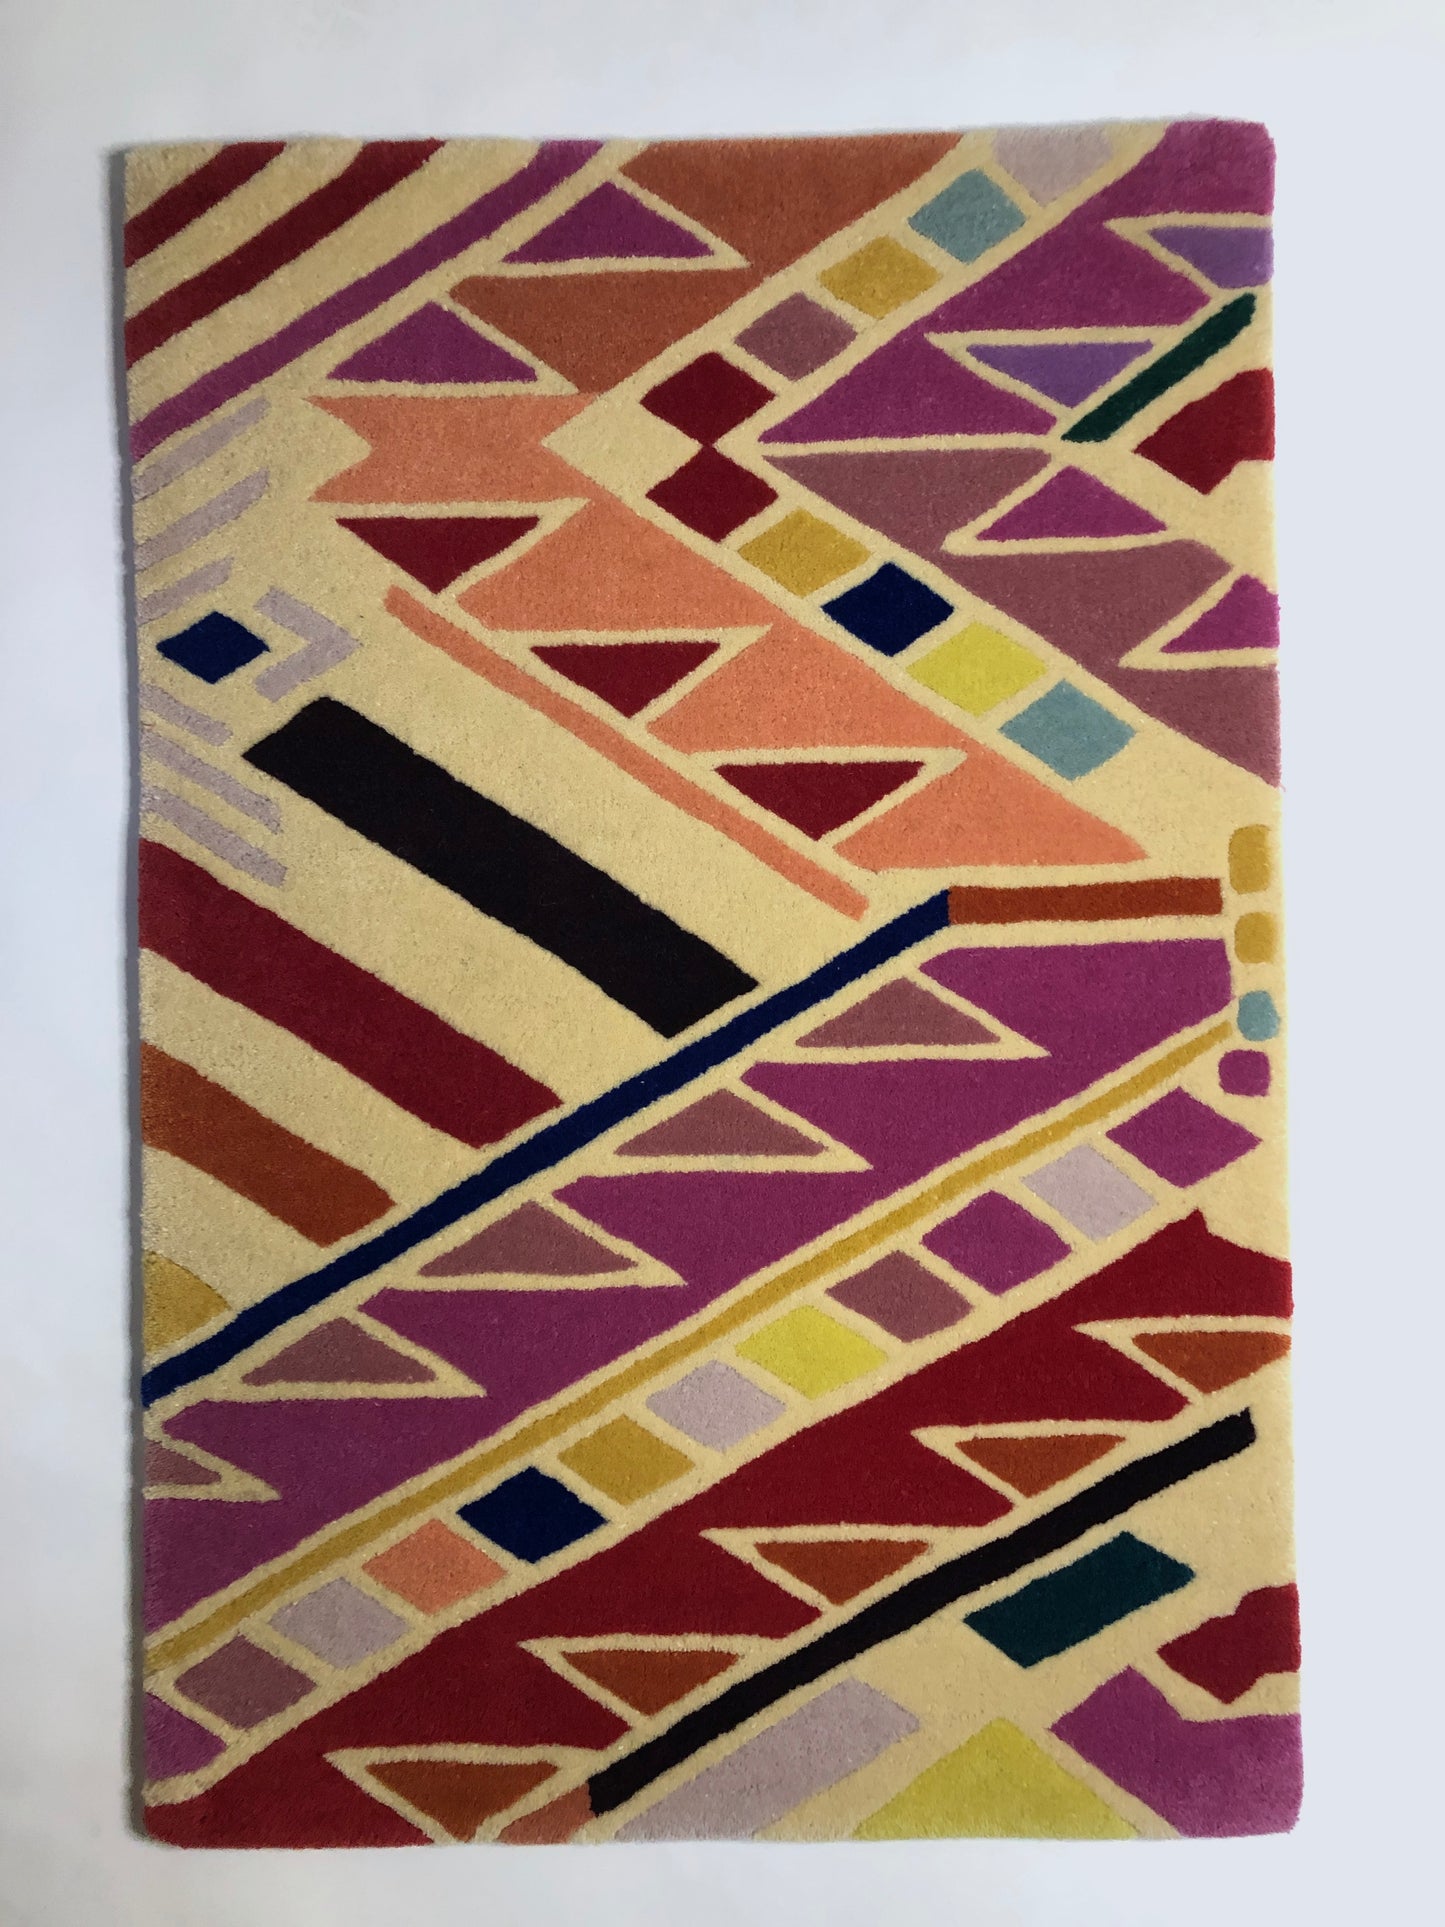 Rug, Hand Tufted Wool, Colorful Zickzack Patterned